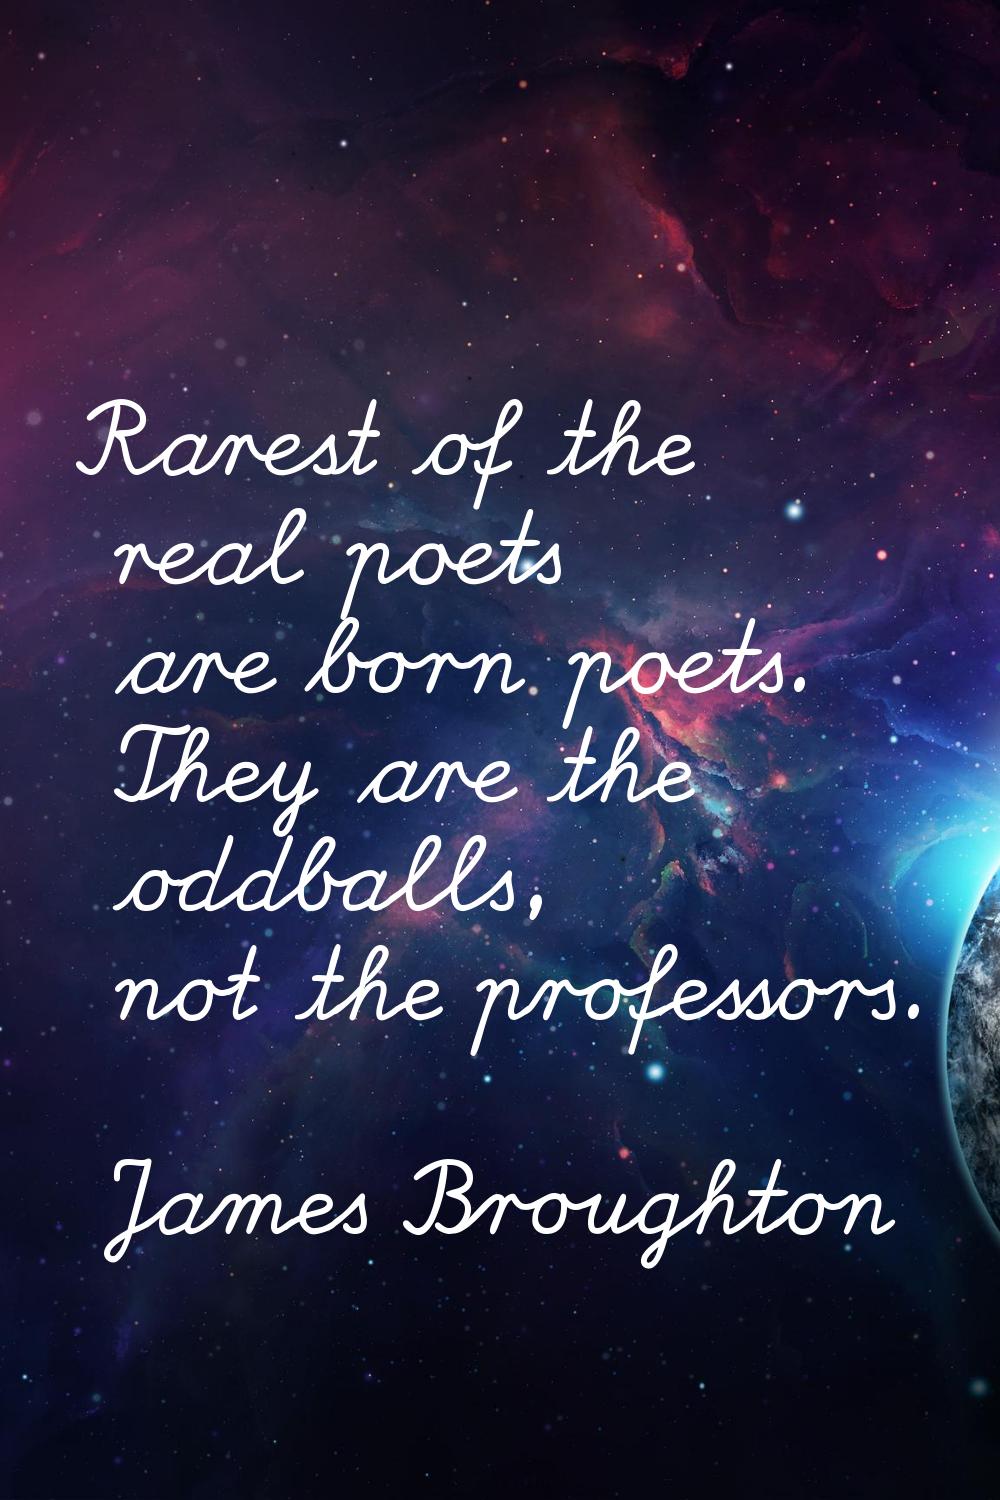 Rarest of the real poets are born poets. They are the oddballs, not the professors.